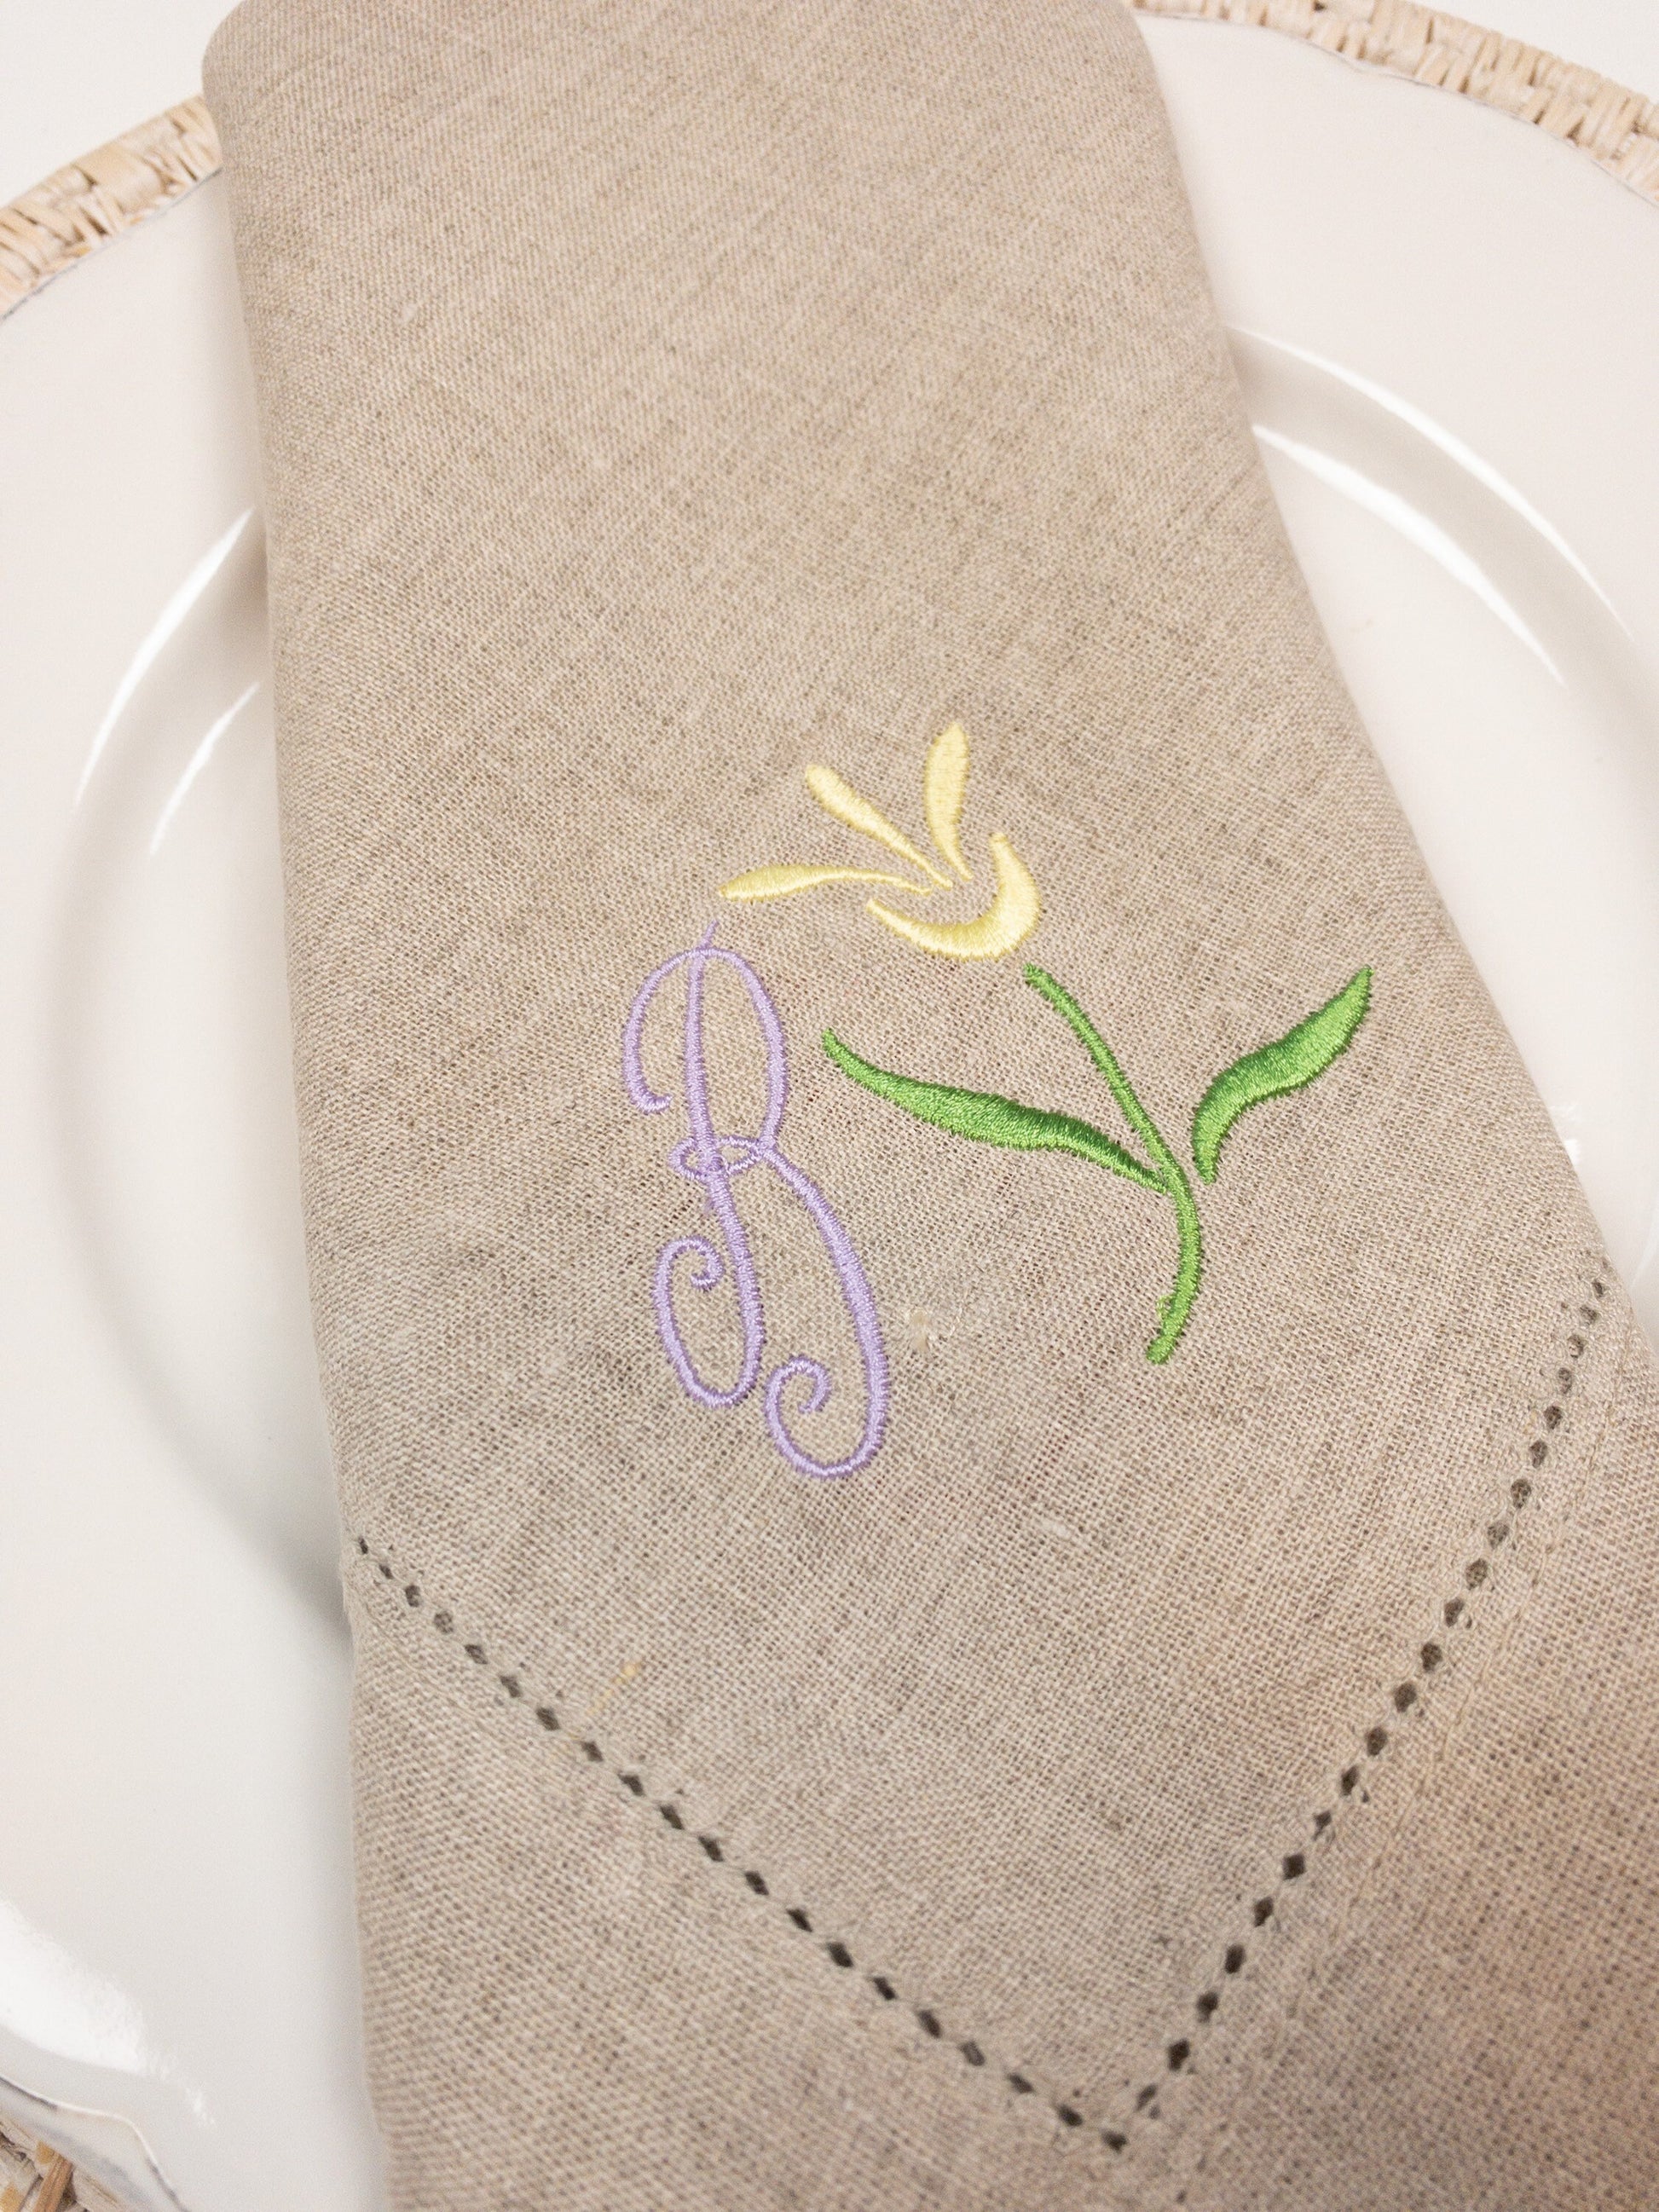 Vintage Inspired Flower Monogrammed Cloth Dinner Napkin, Abstract Tulip Personalized Linen Napkin #126